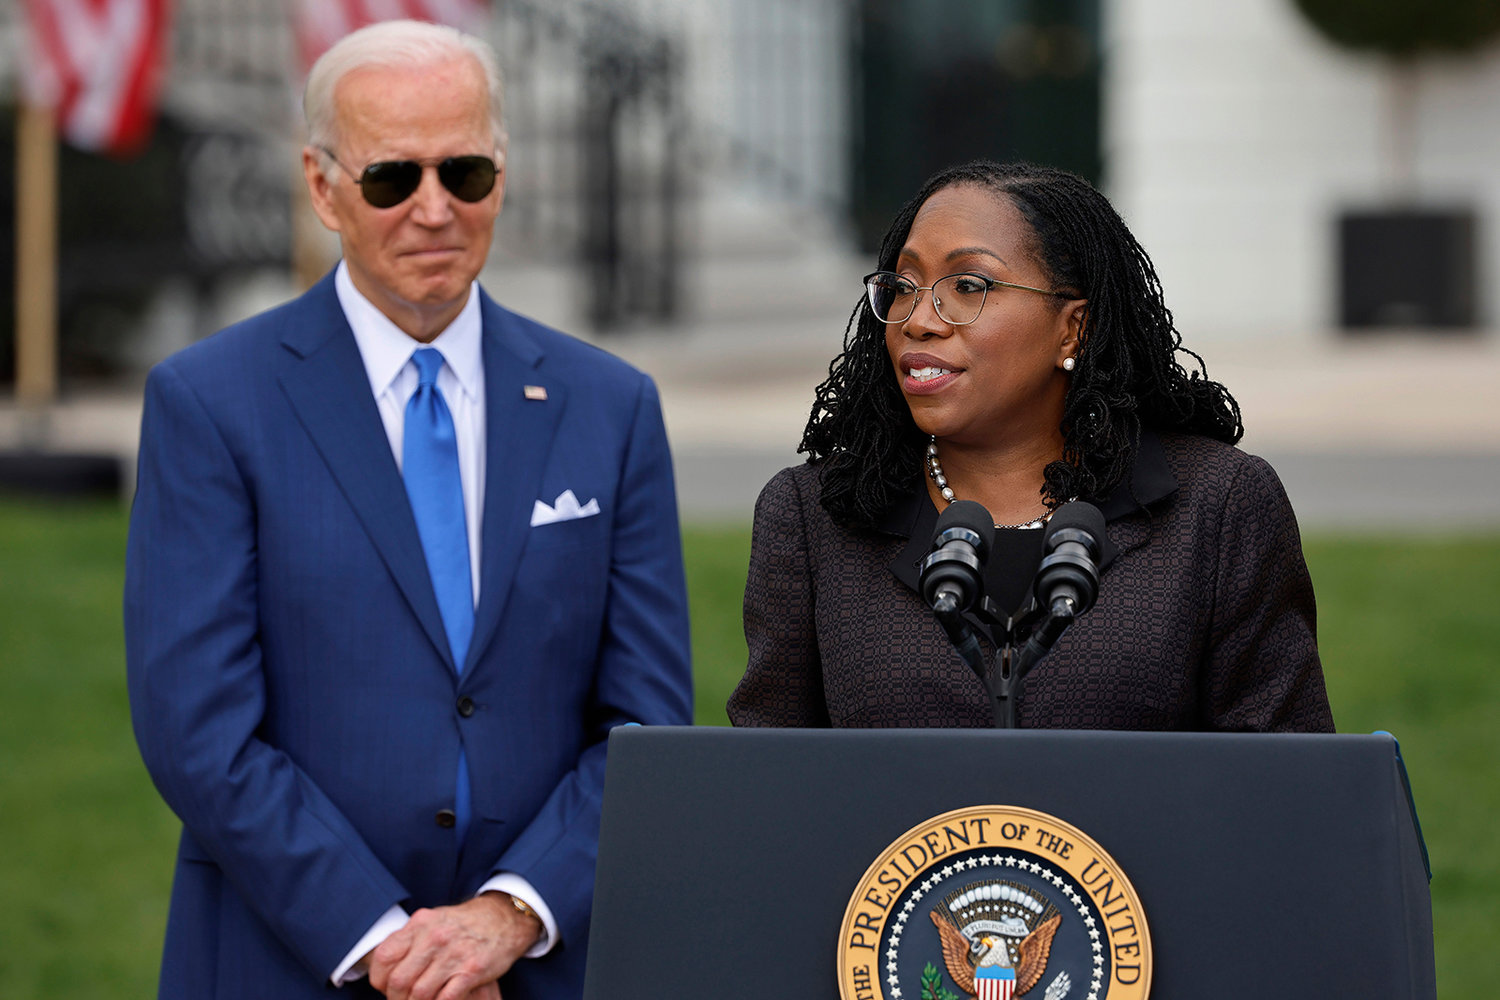 Judge Ketanji Brown Jackson speaks during an event celebrating her confirmation to the U.S. Supreme Court with U.S. President Joe Biden on the South Lawn of the White House on April 8, 2022, in Washington, DC. Judge Jackson was confirmed by the Senate 53-47 and is set to become the first Black woman to sit on the highest court. (Chip Somodevilla/Getty Images/TNS)